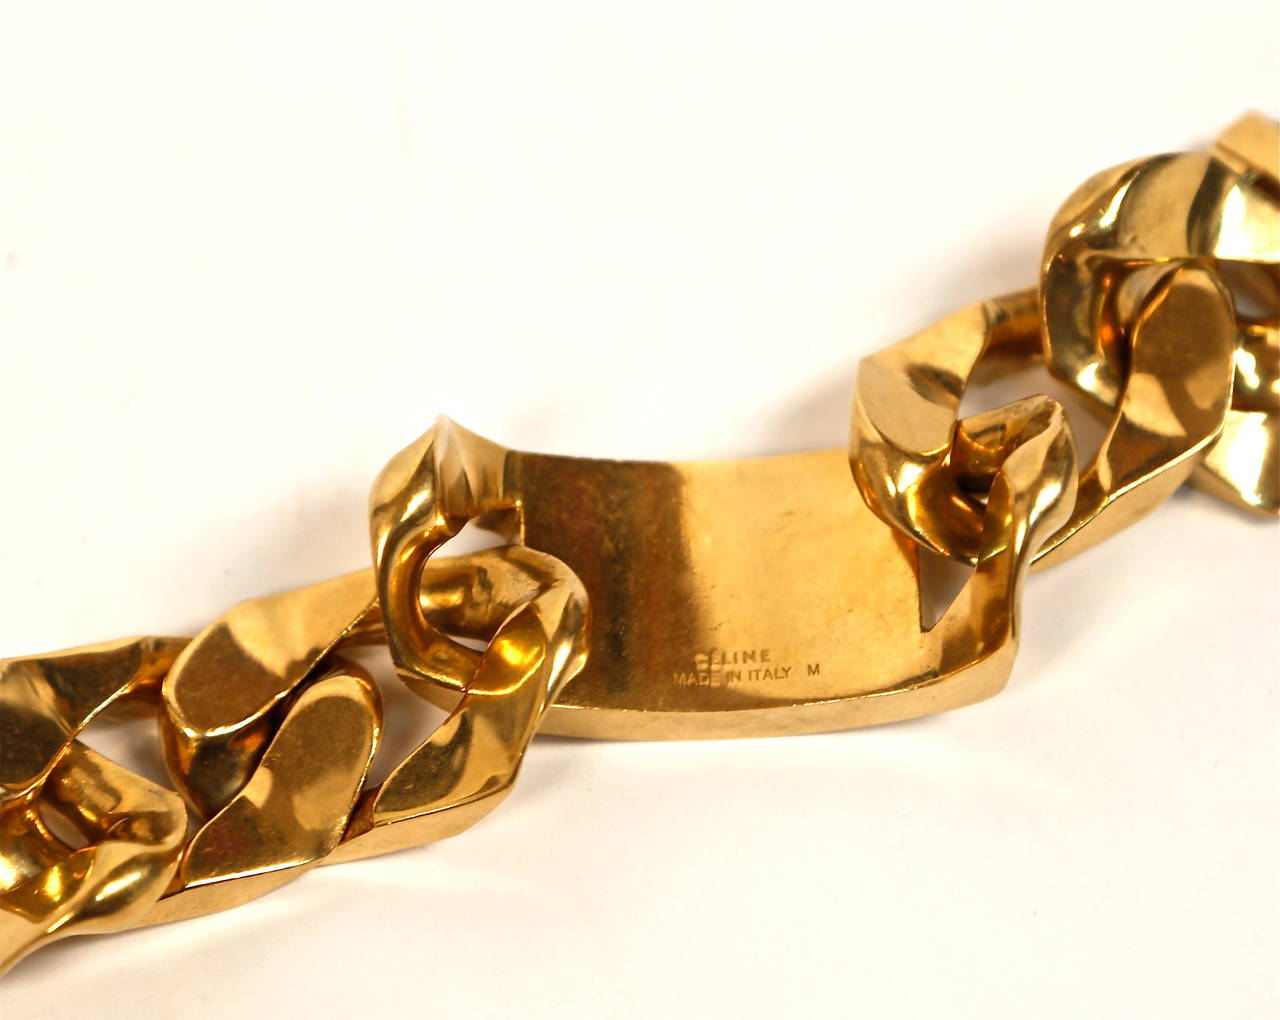 Chunky link gold-plated ID bracelet from Celine designed by Phoebe Philo. Size 'M'. Bracelet measures about 1.125